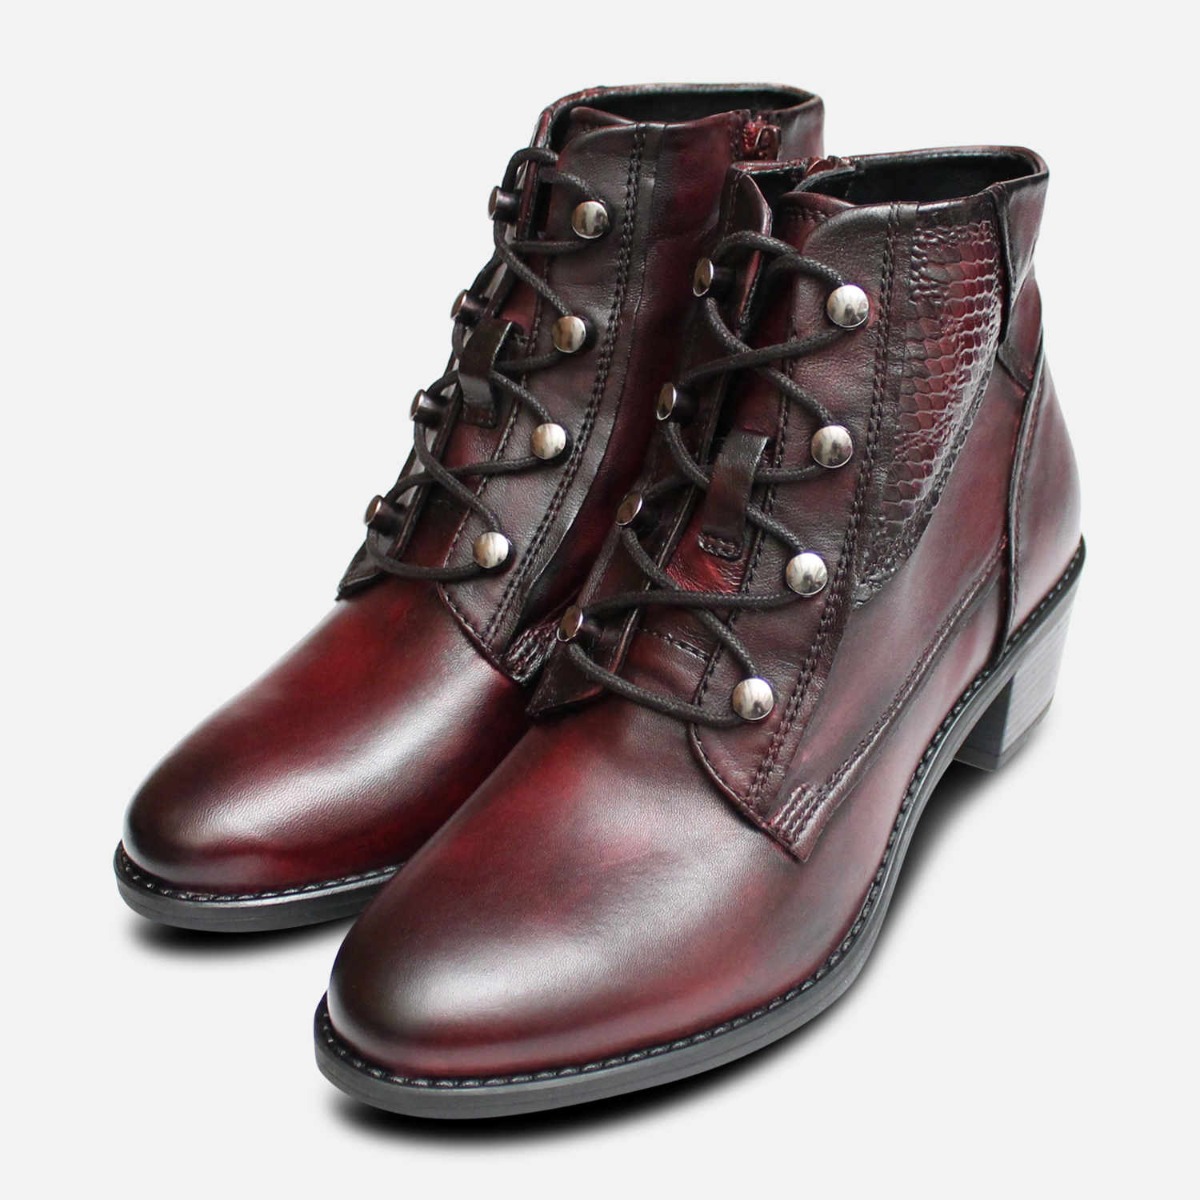 burgundy leather shoes